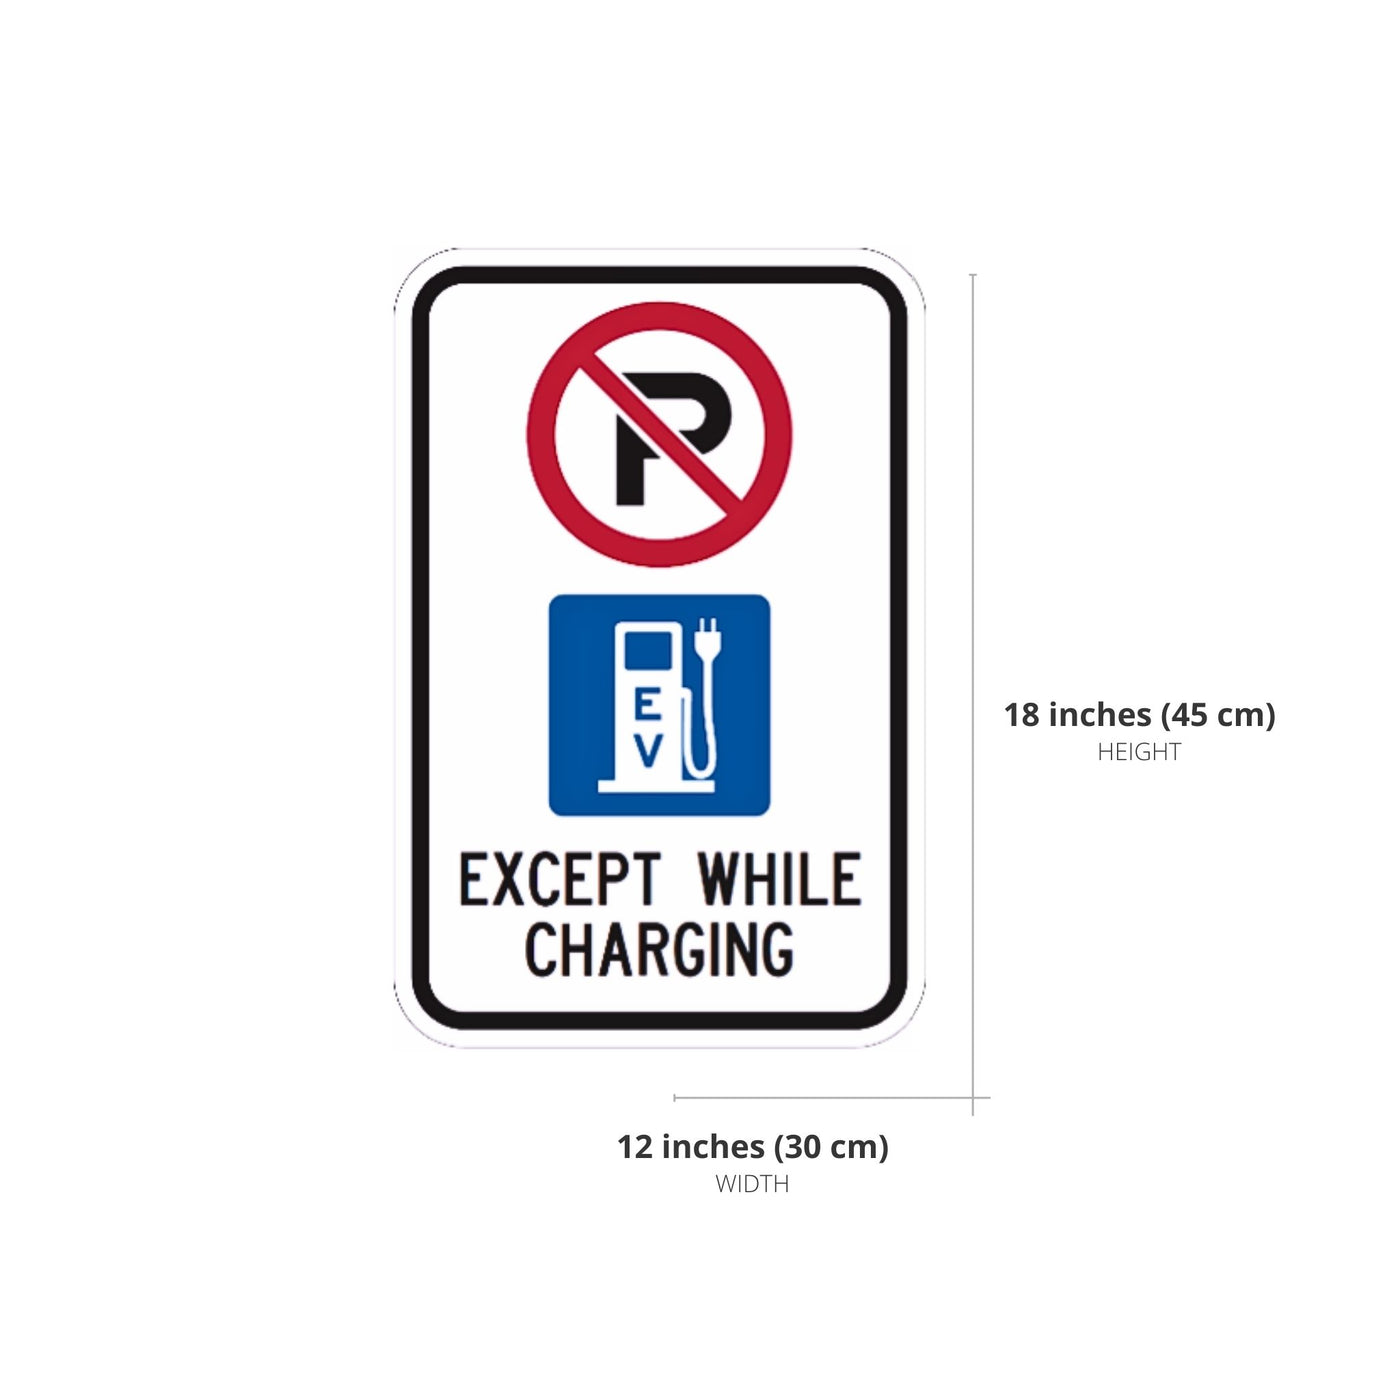 EV Parking Only While Charging Sign English 2048x2048 Sizes